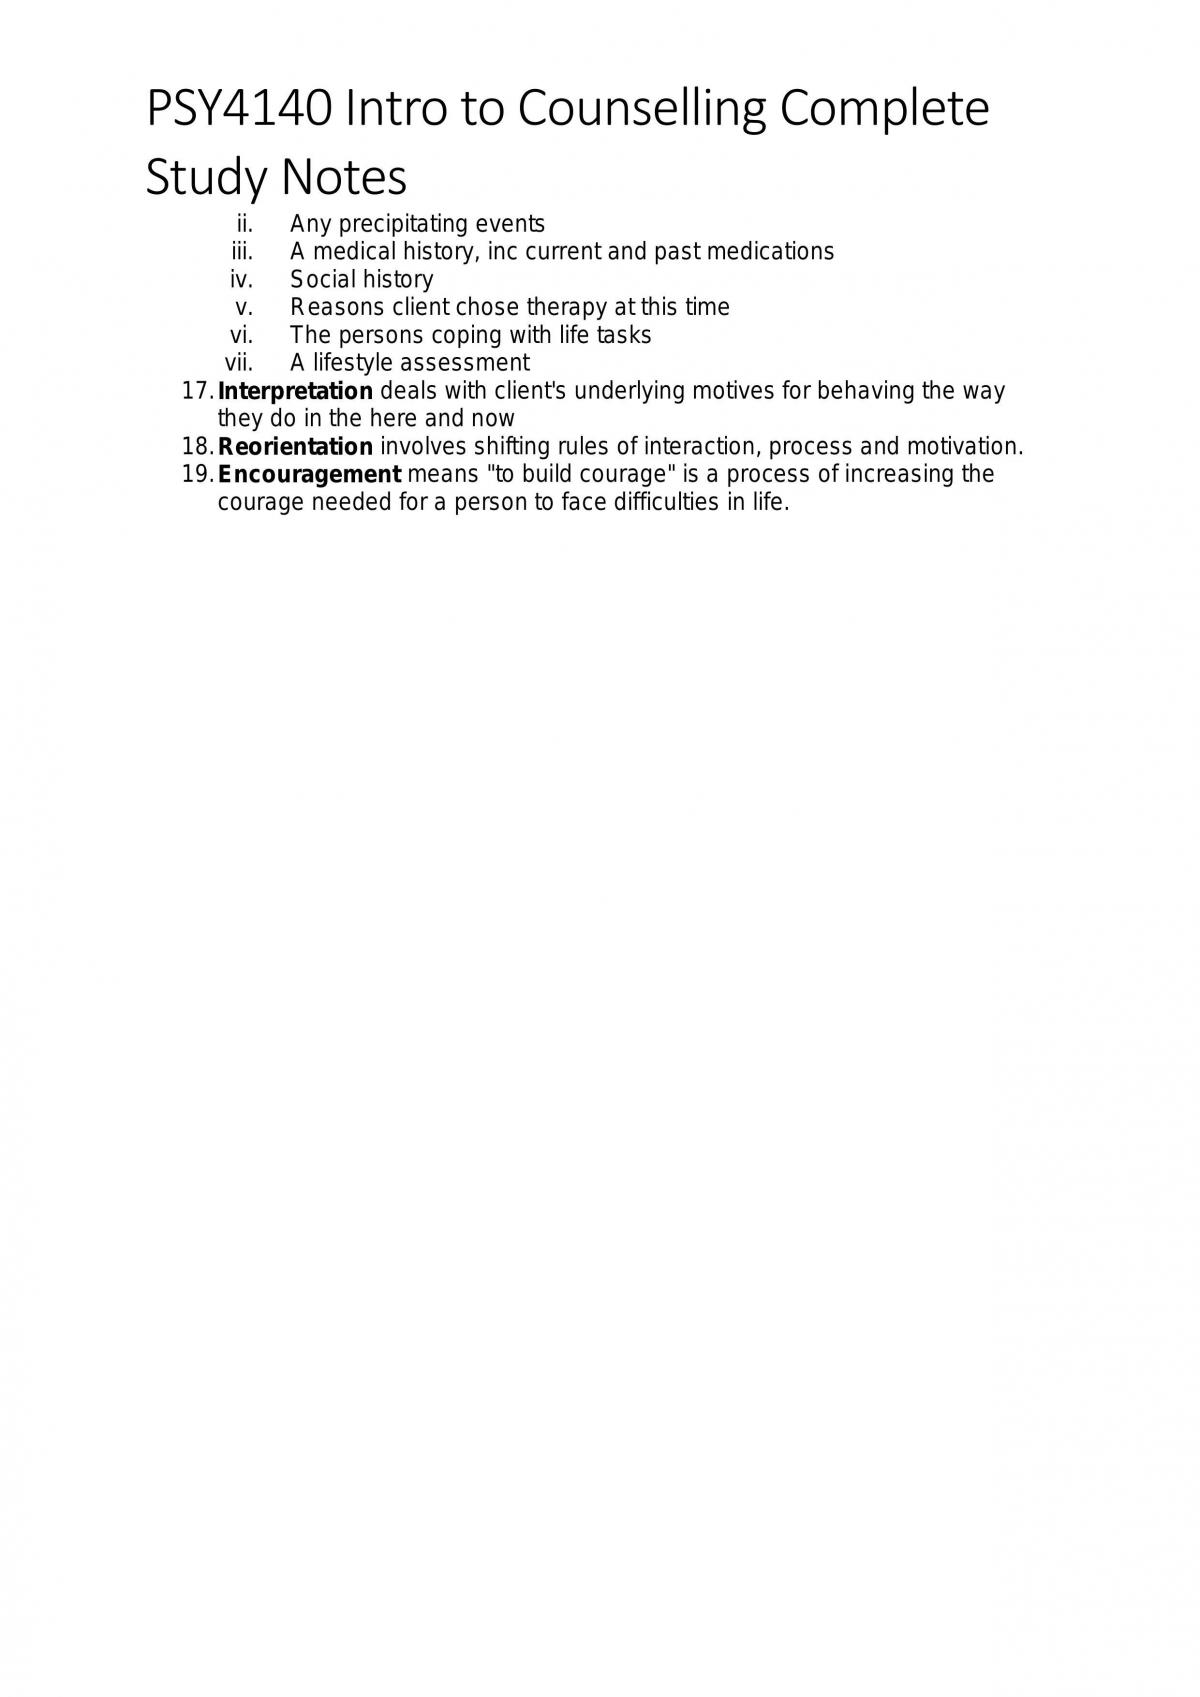 Introduction to Counselling Complete Study Notes - Page 13